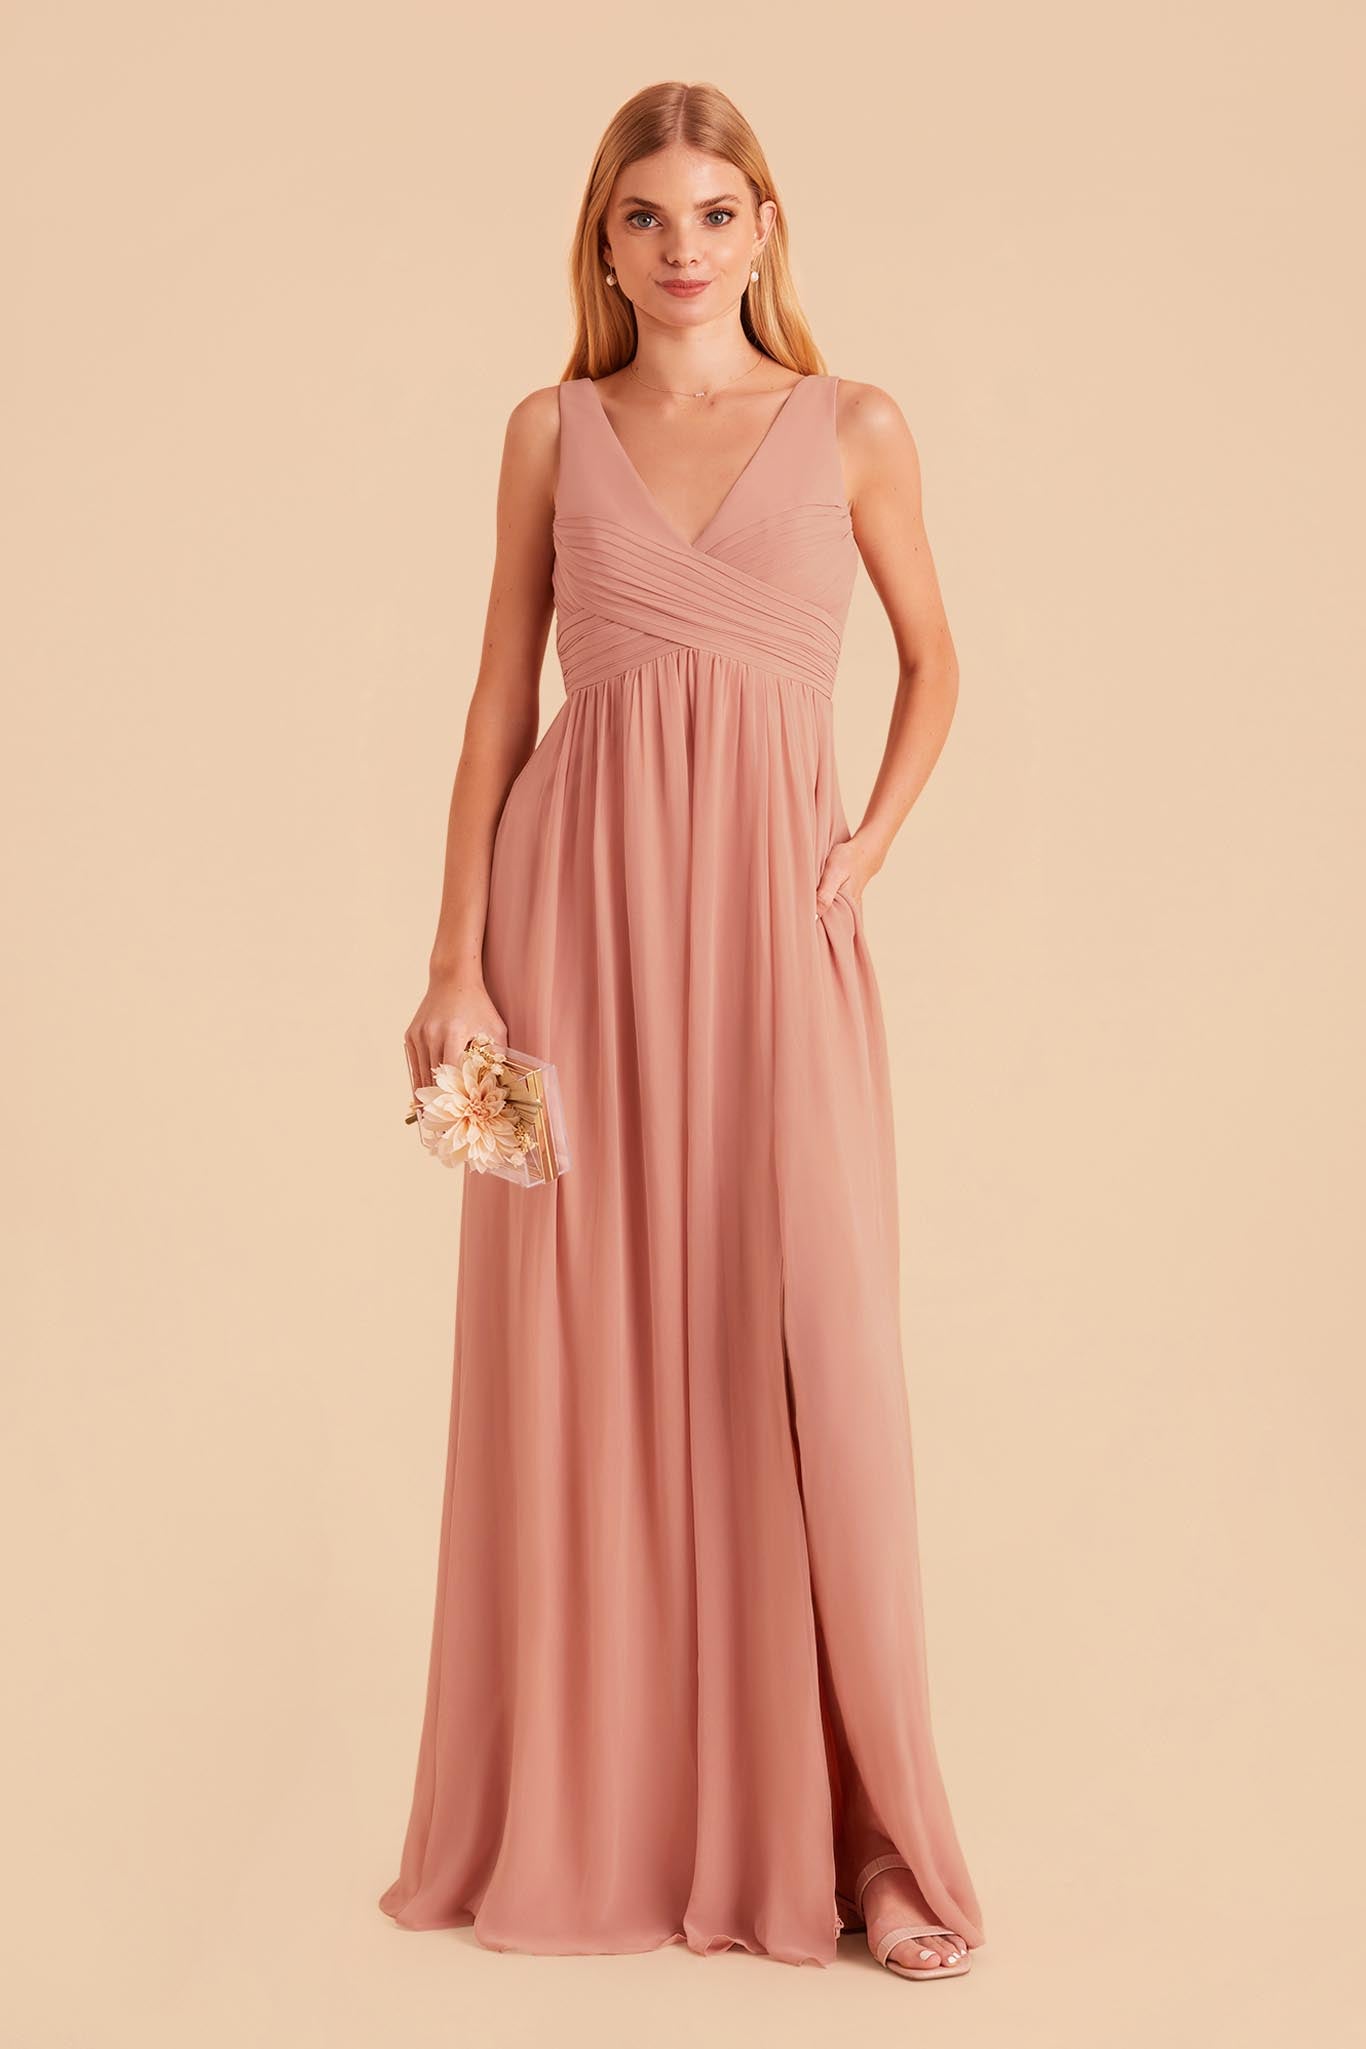 Dusty Rose Laurie Empire Dress by Birdy Grey